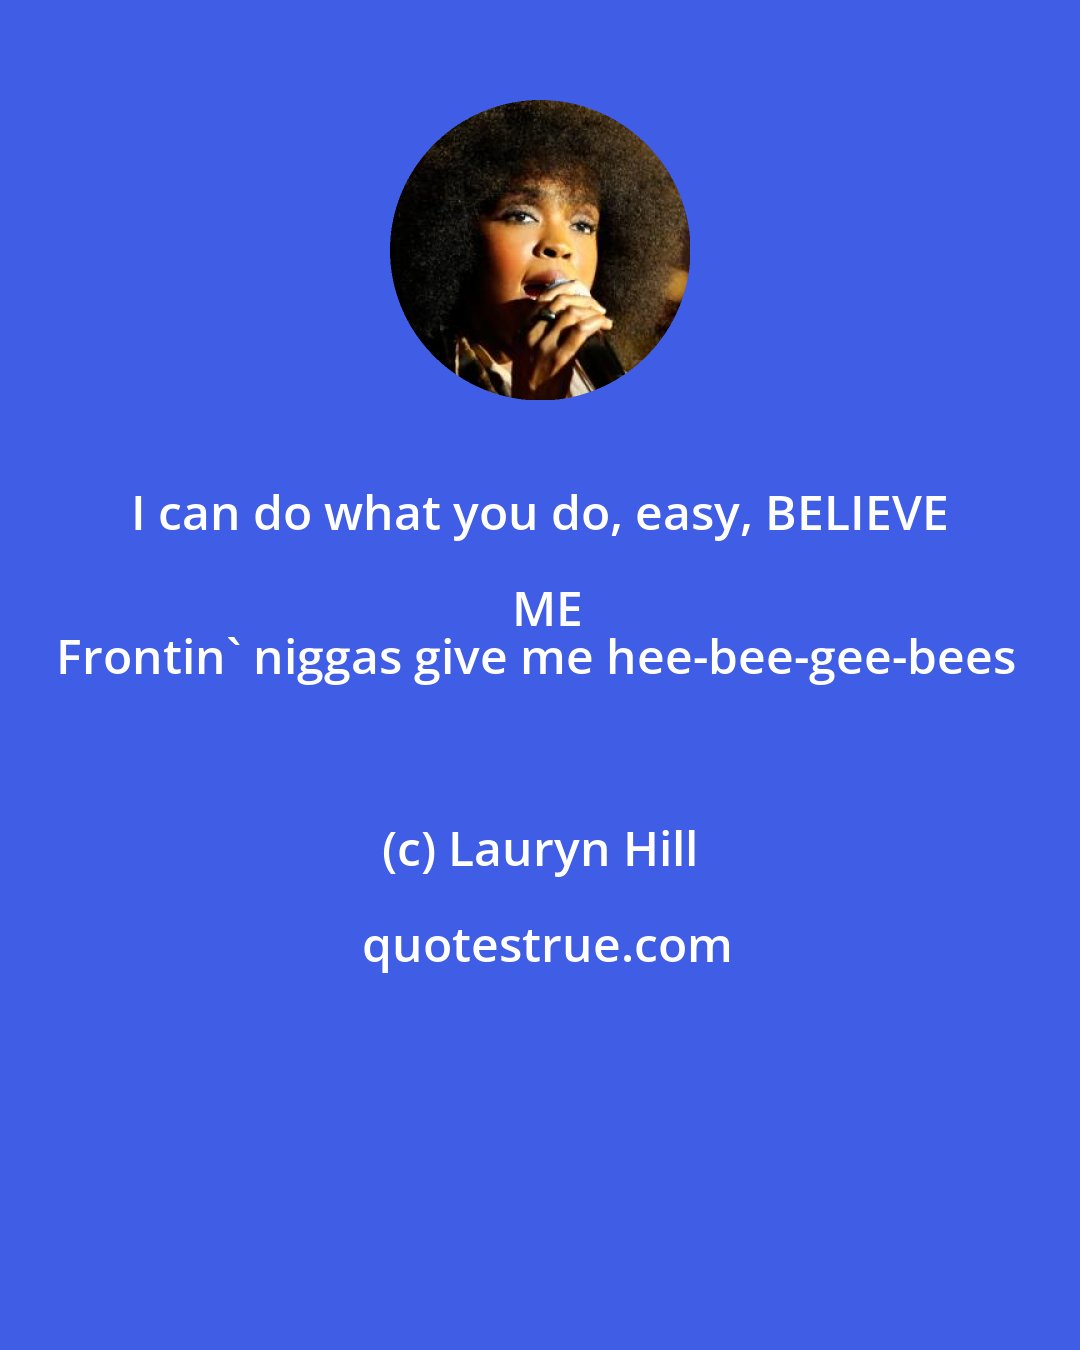 Lauryn Hill: I can do what you do, easy, BELIEVE ME
Frontin' niggas give me hee-bee-gee-bees